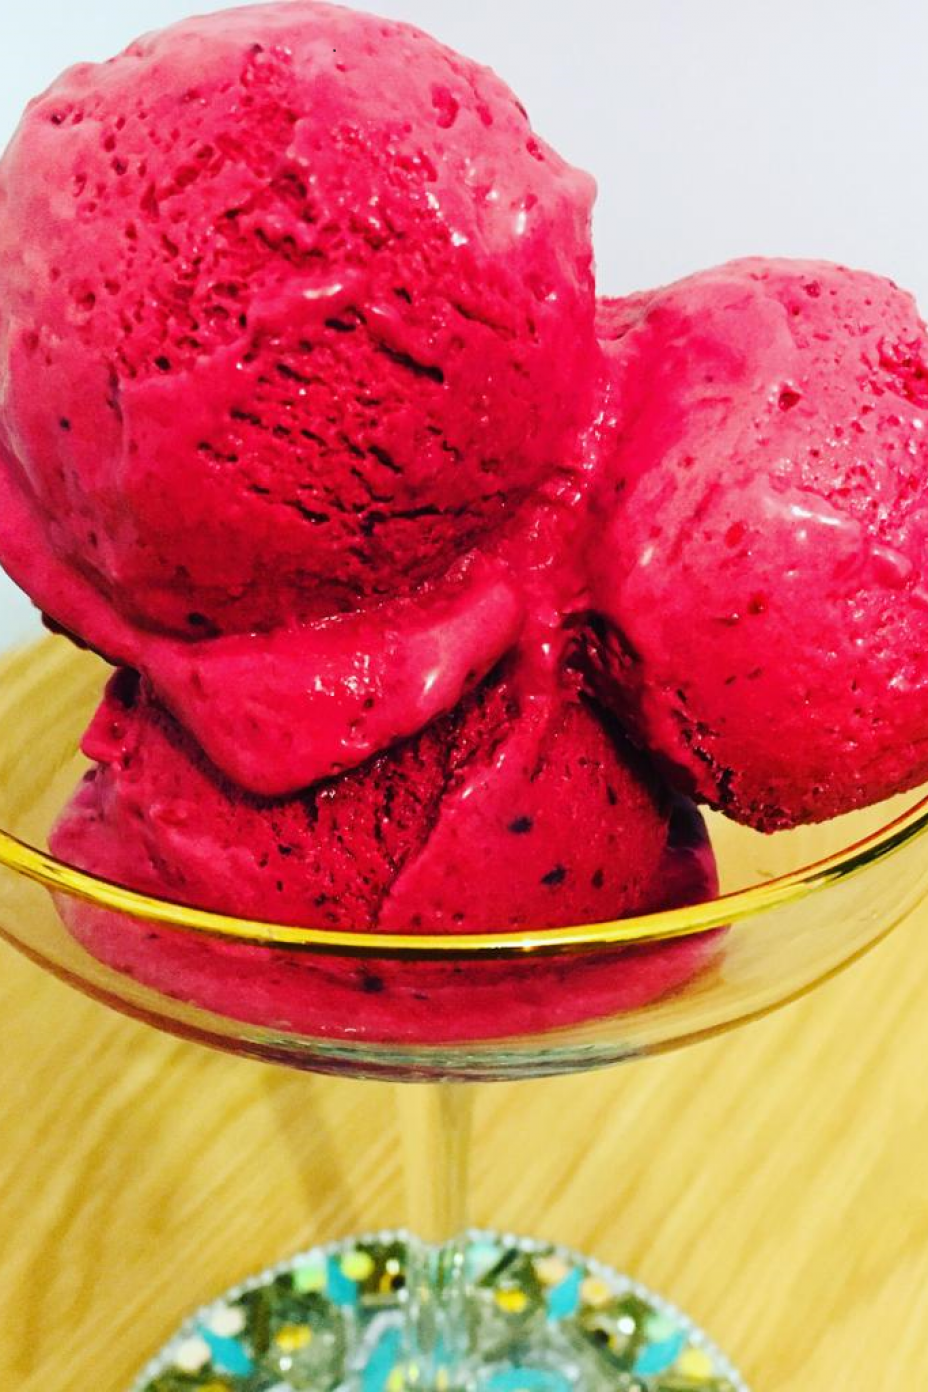 No churn and instant blackberry ice creams - delicious and simple dessert ideas